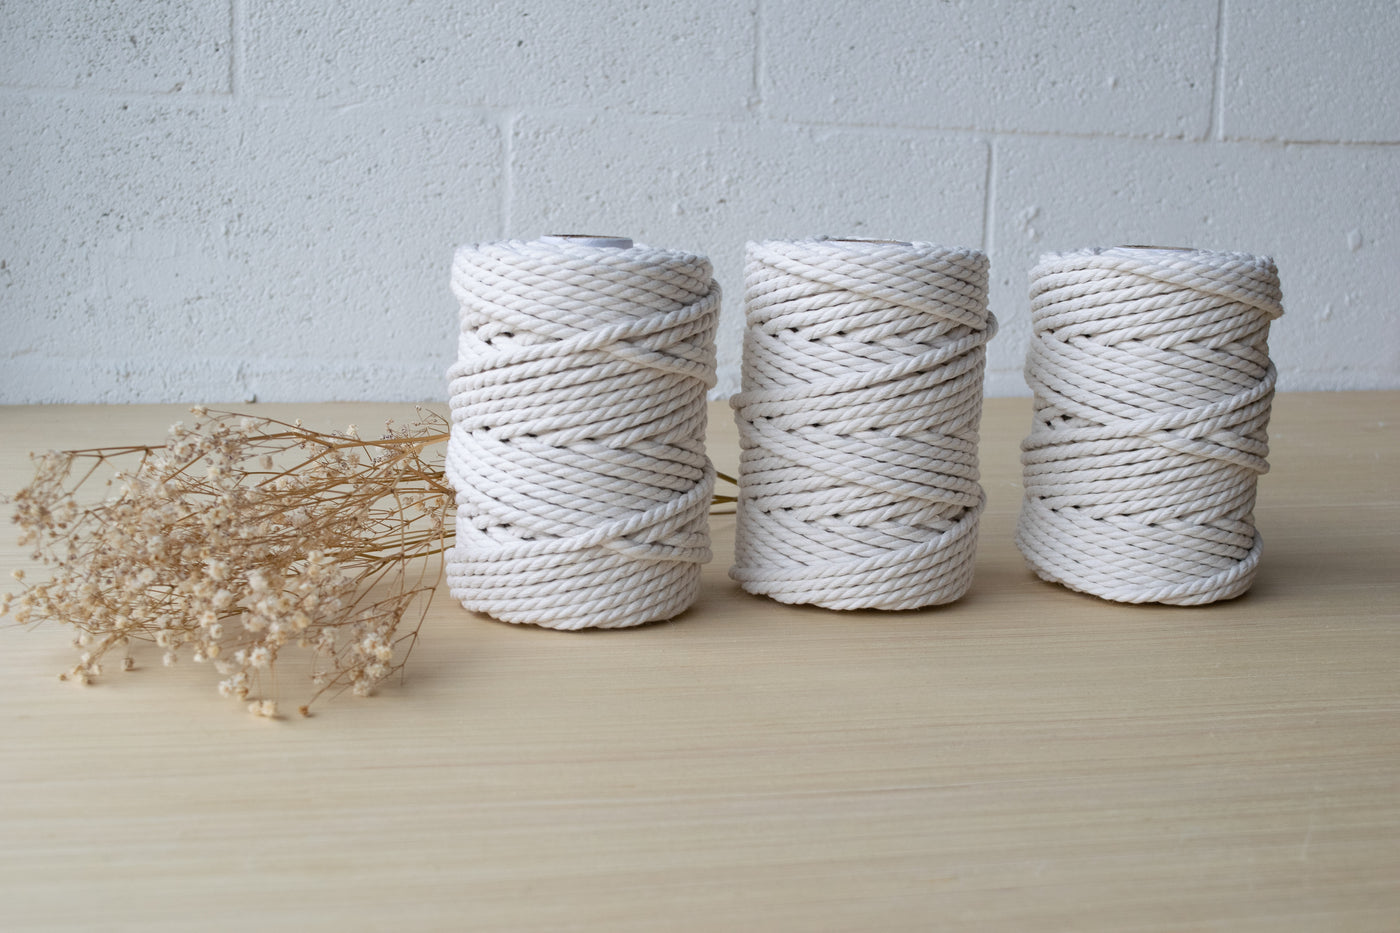 5-20mm Cotton Rope Natural Color Cotton Cord Diy Macrame Rope